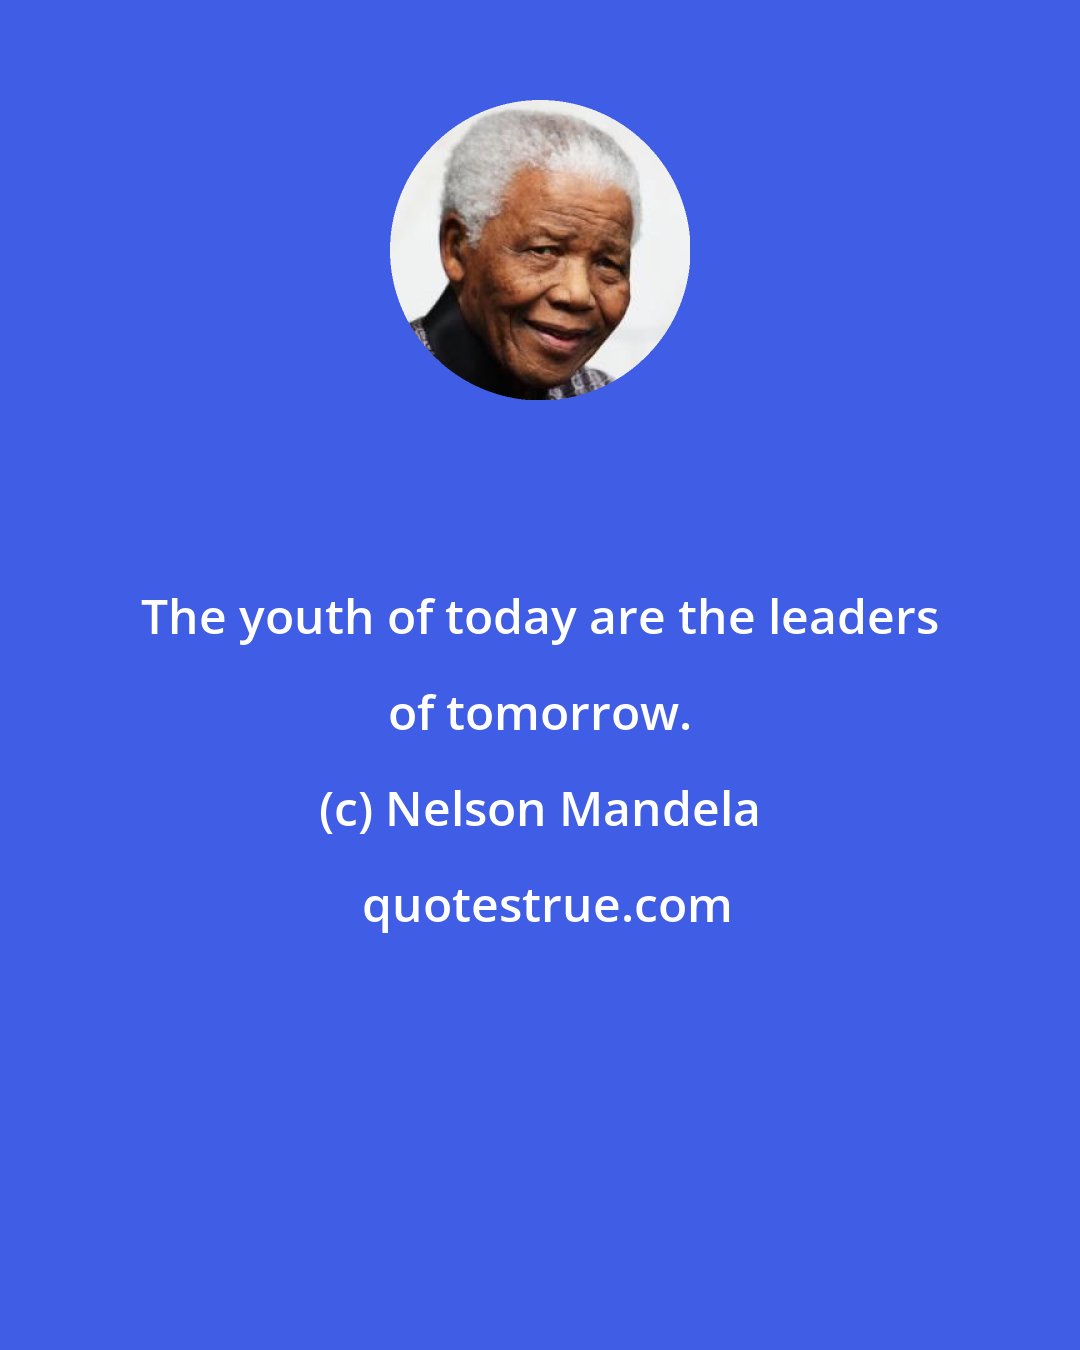 Nelson Mandela: The youth of today are the leaders of tomorrow.